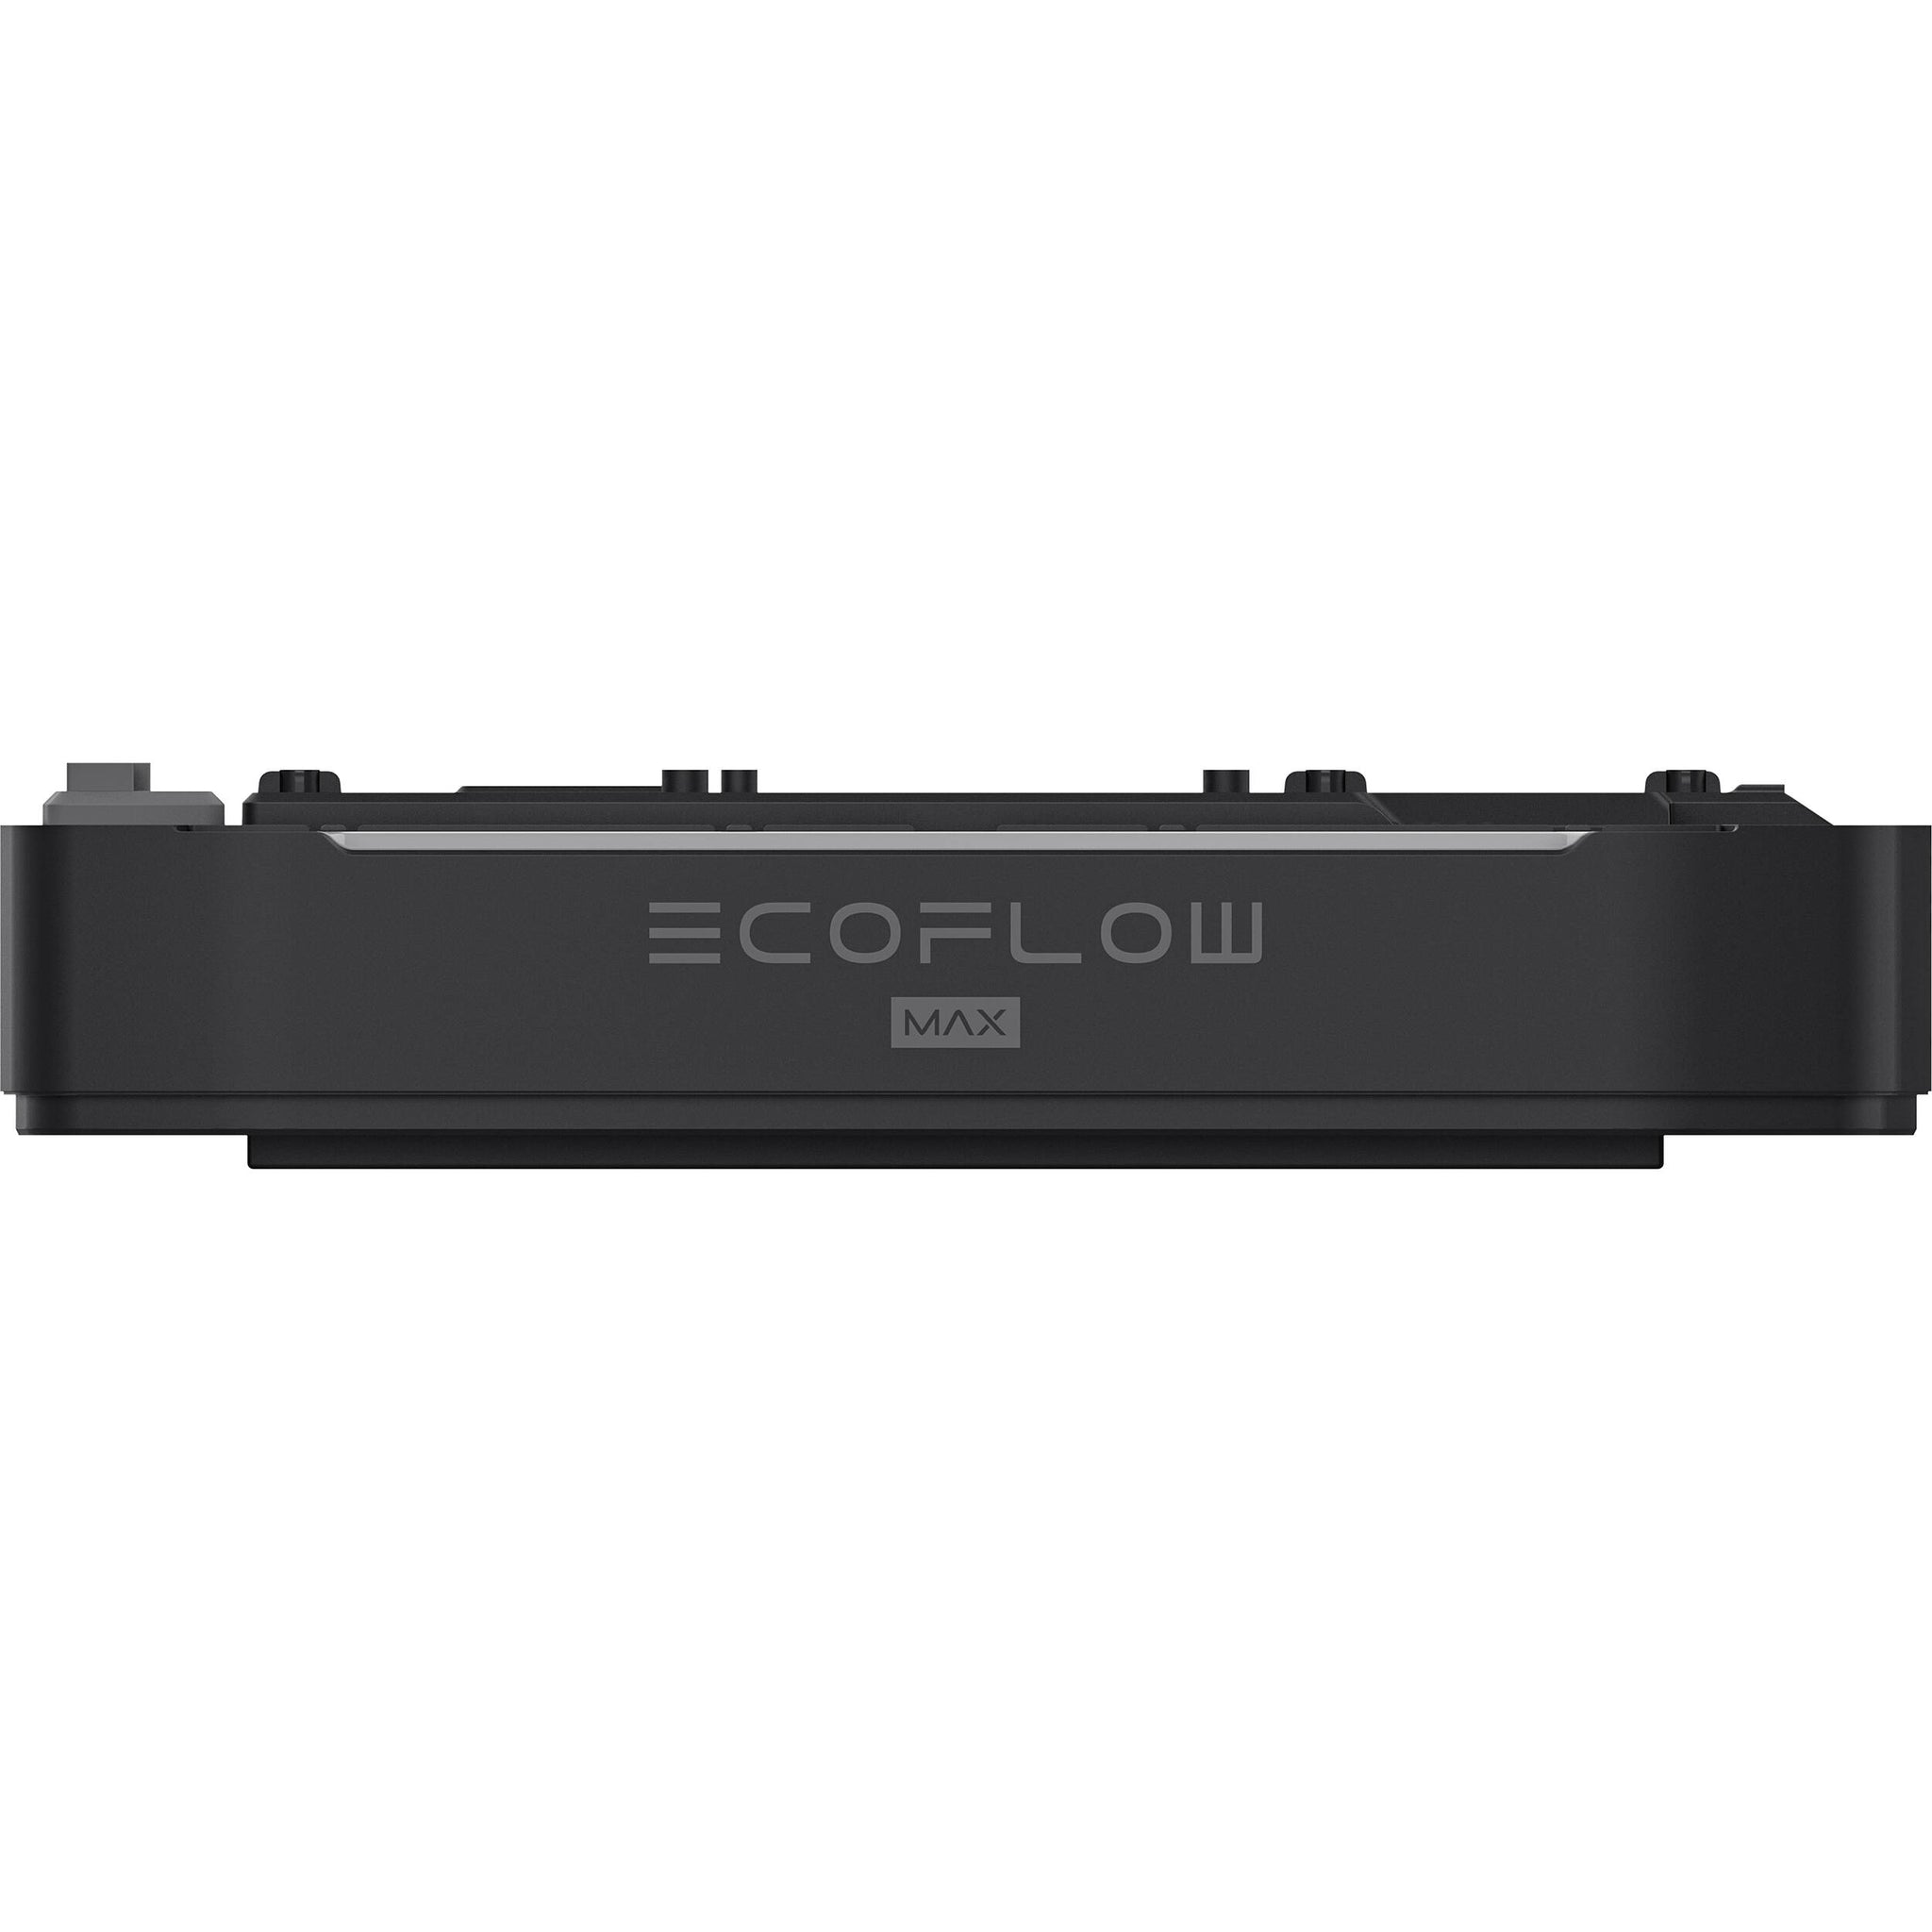 Ecoflow -  River 600 Extra Battery